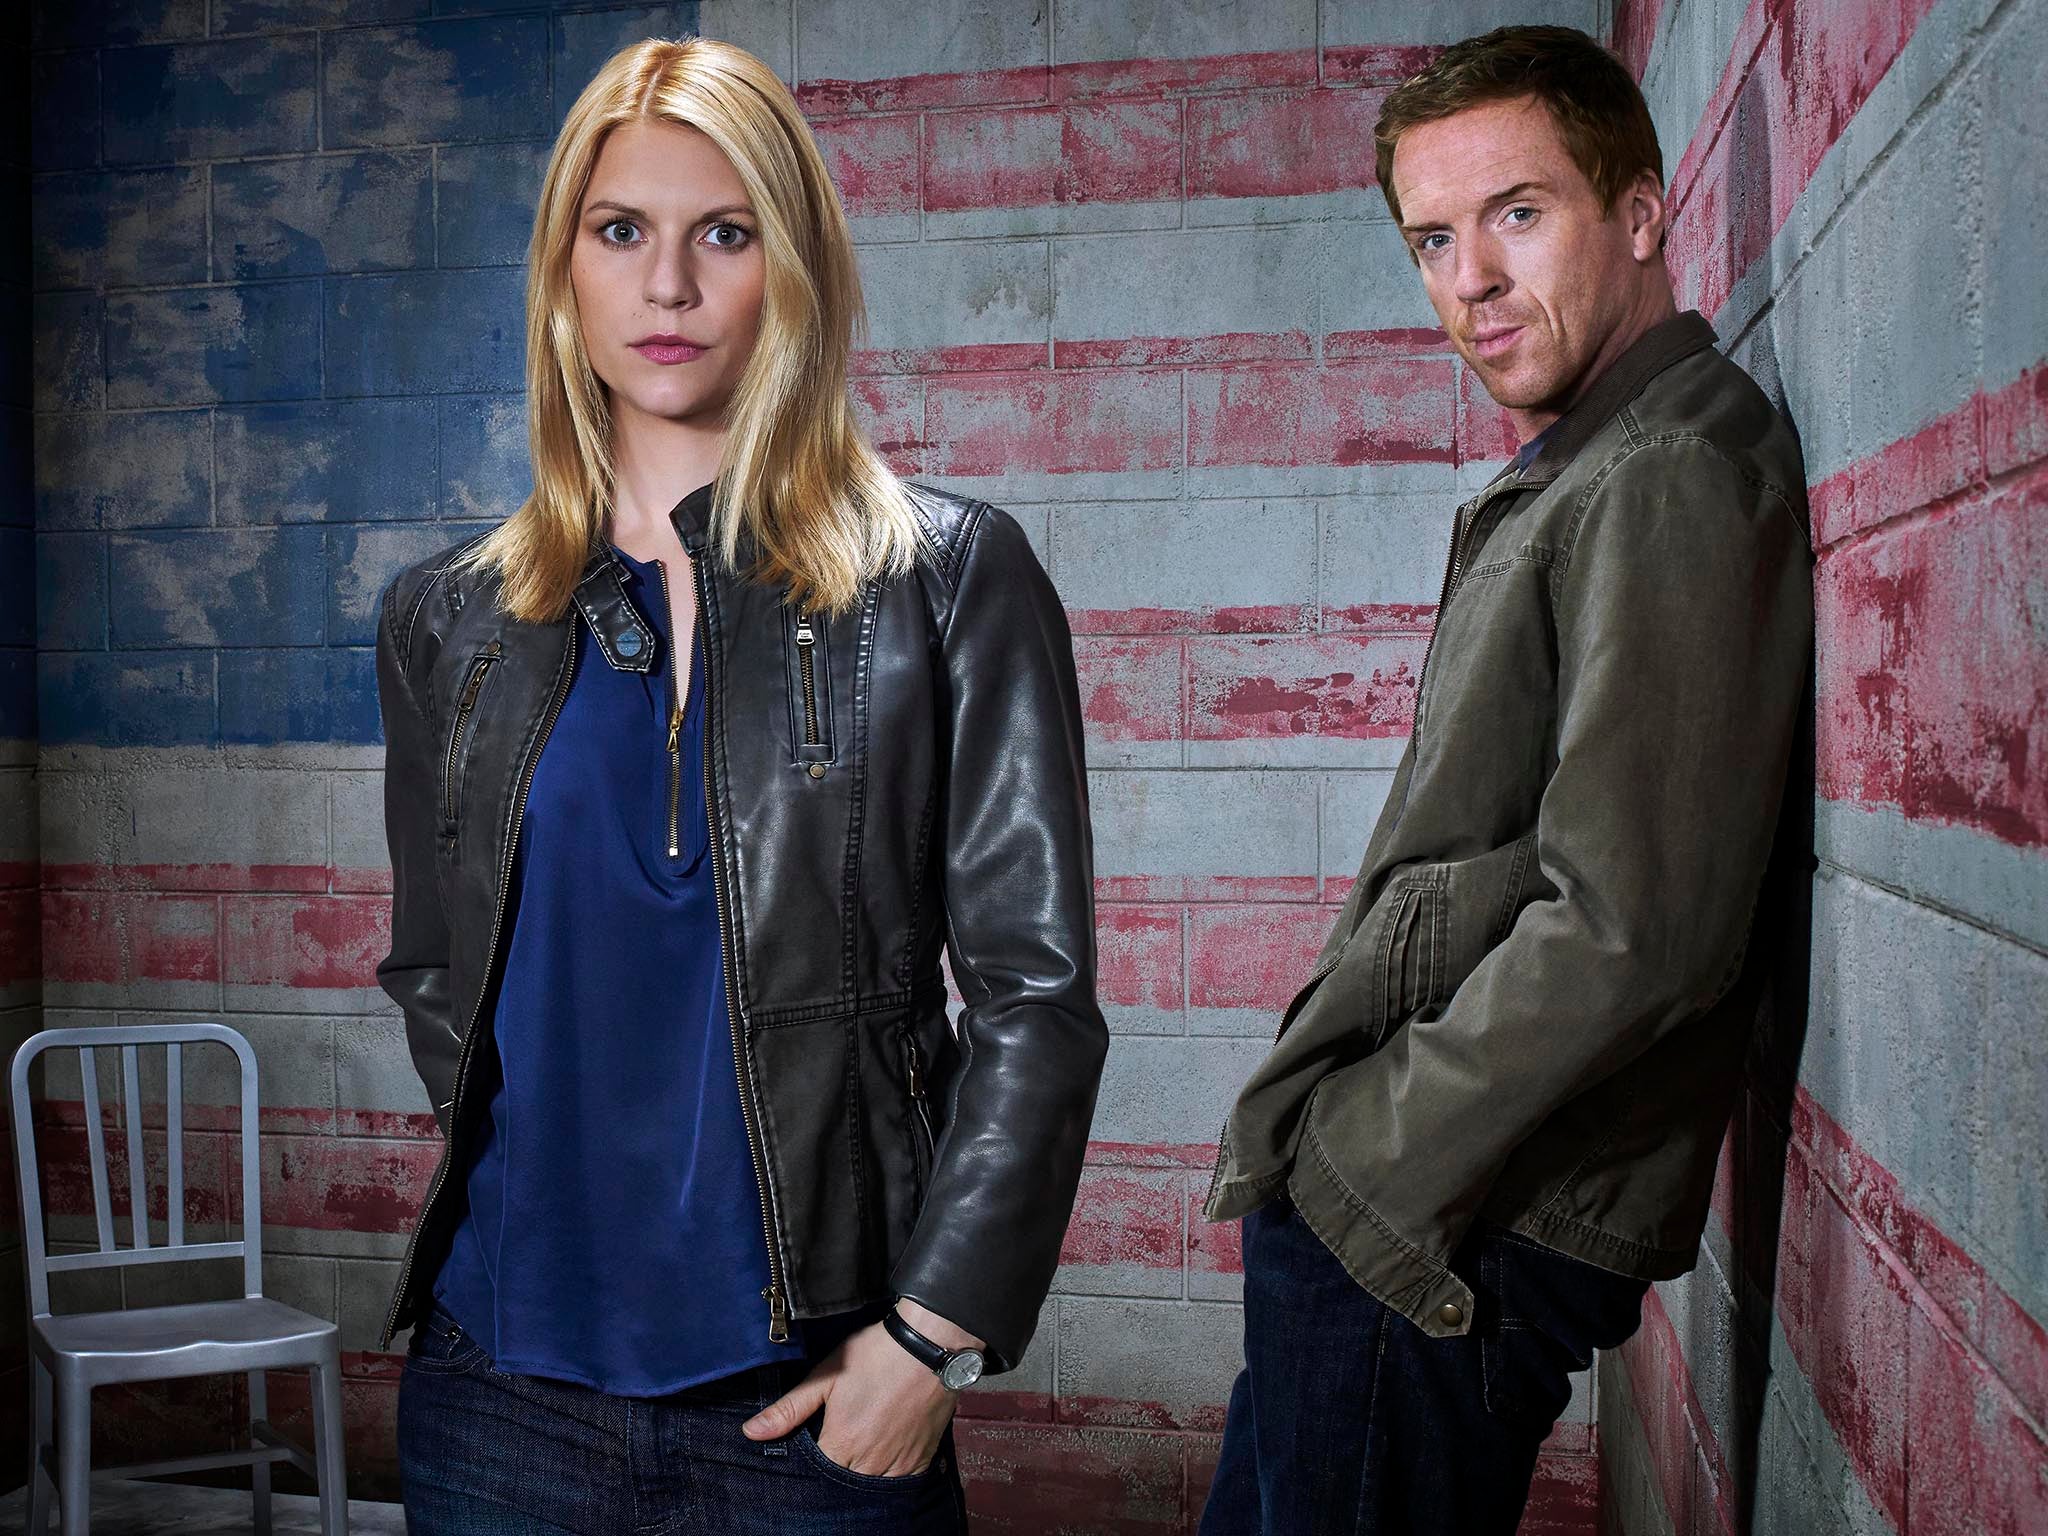 Claire Danes as Carrie Mathison and Damian Lewis as Nicholas Brody in ‘Homeland’